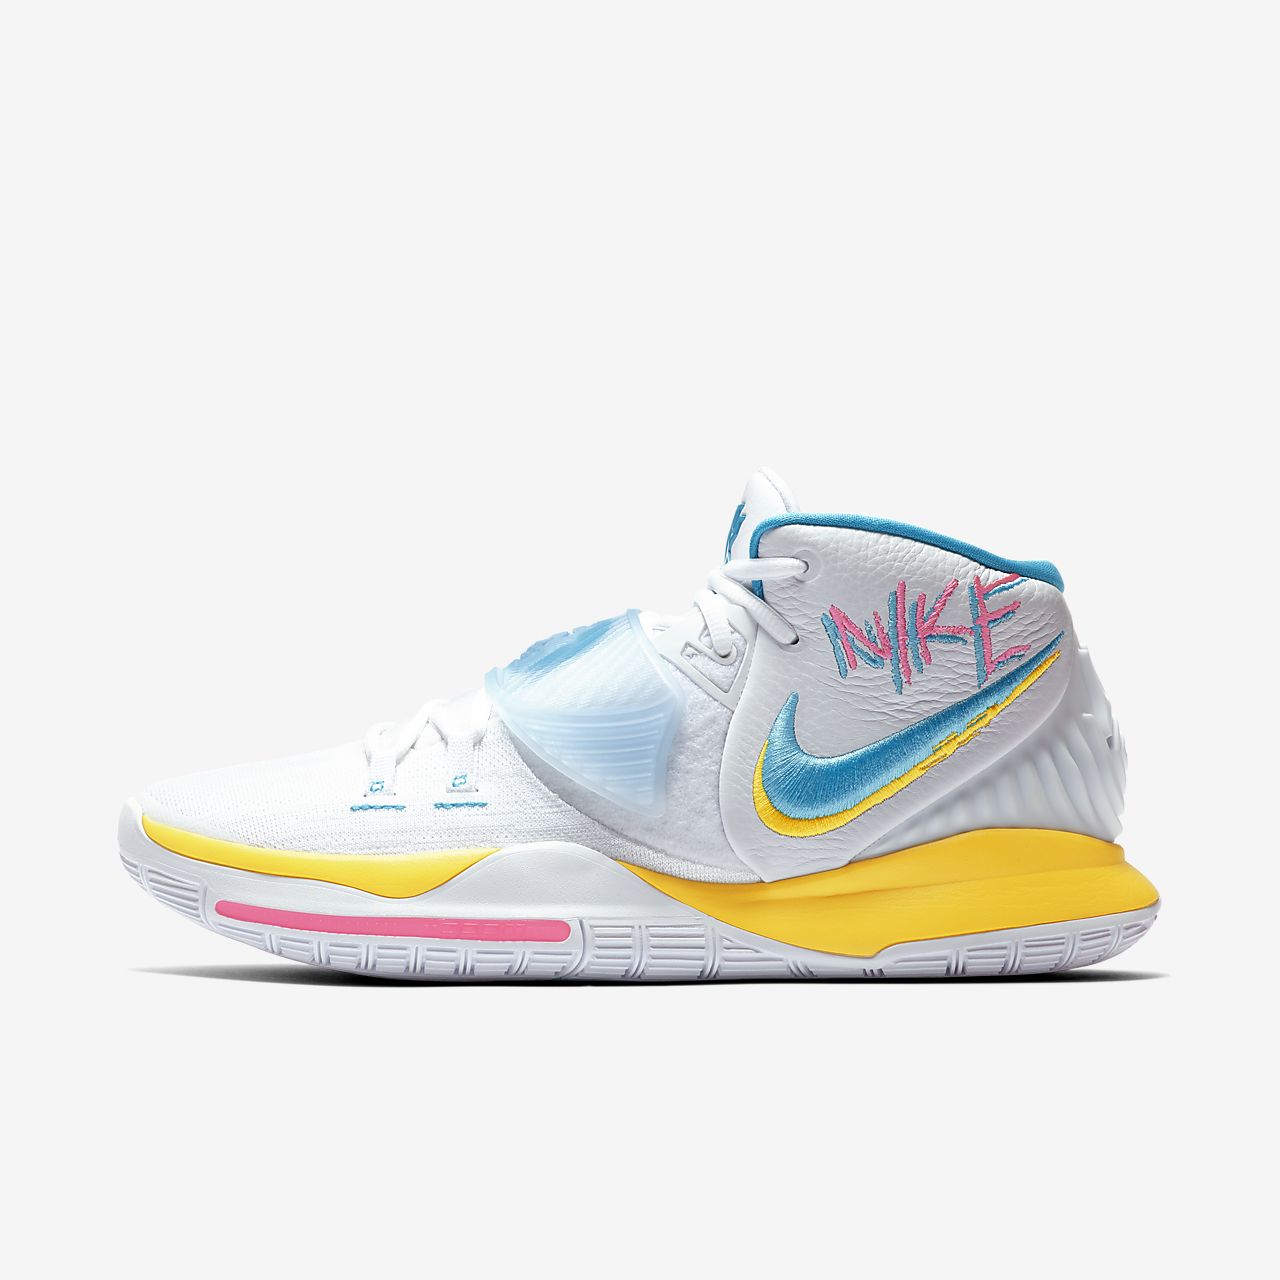 Official Images Of The Eye Catching Nike Kyrie S2 Hybrid